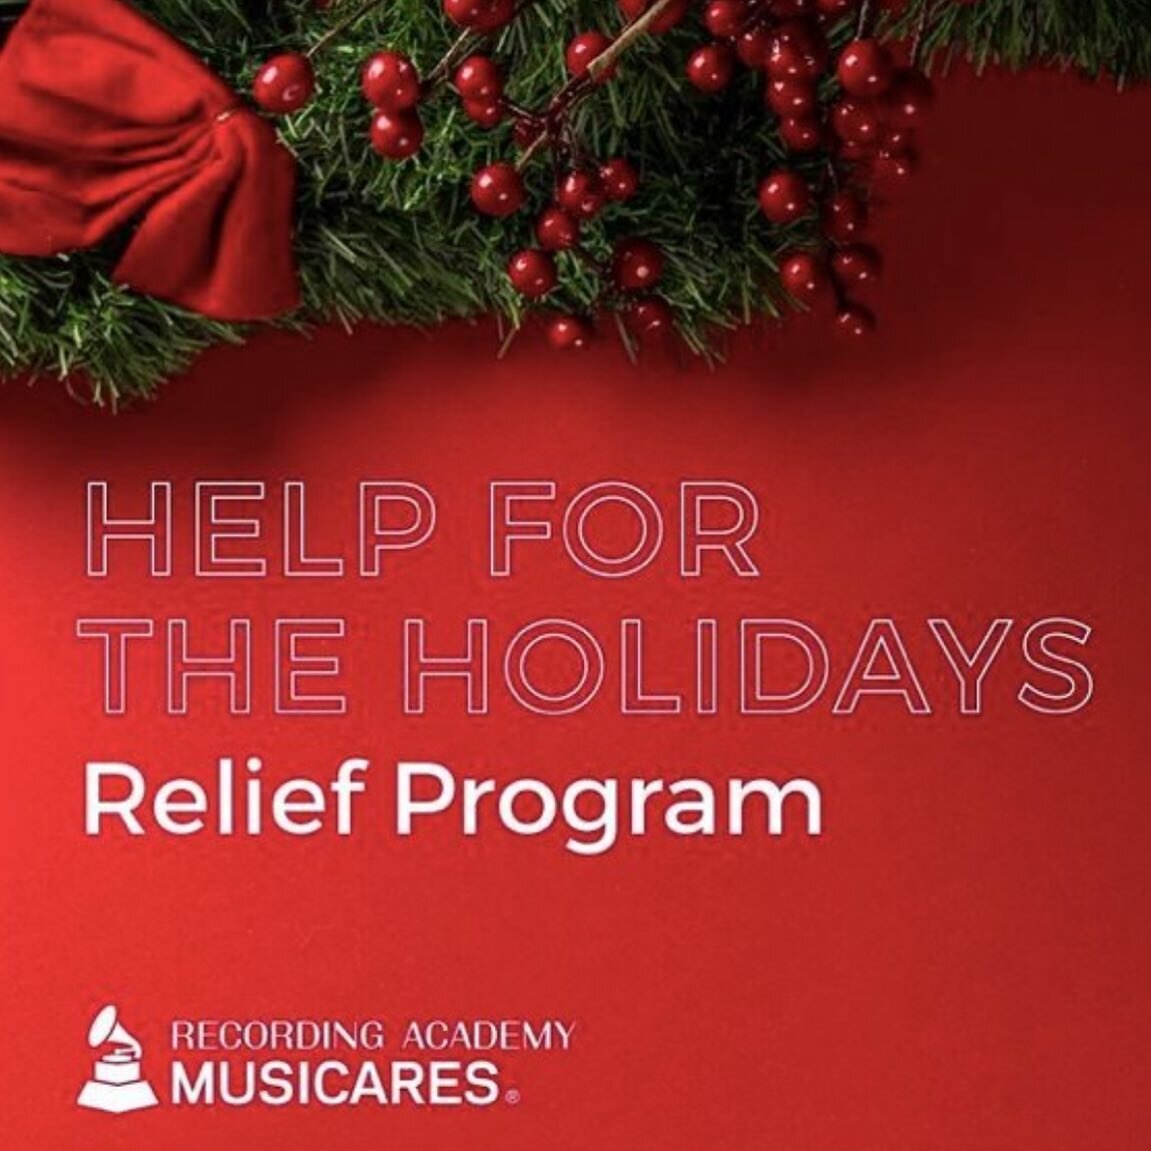 If you are a musician or know a musician who qualifies, @musicares is giving away 4,000 gift cards ($250 e-gift cards for essential goods) to those impacted by the COVID-19 pandemic. 

&ldquo;For those in the music industry, life remains uncertain as